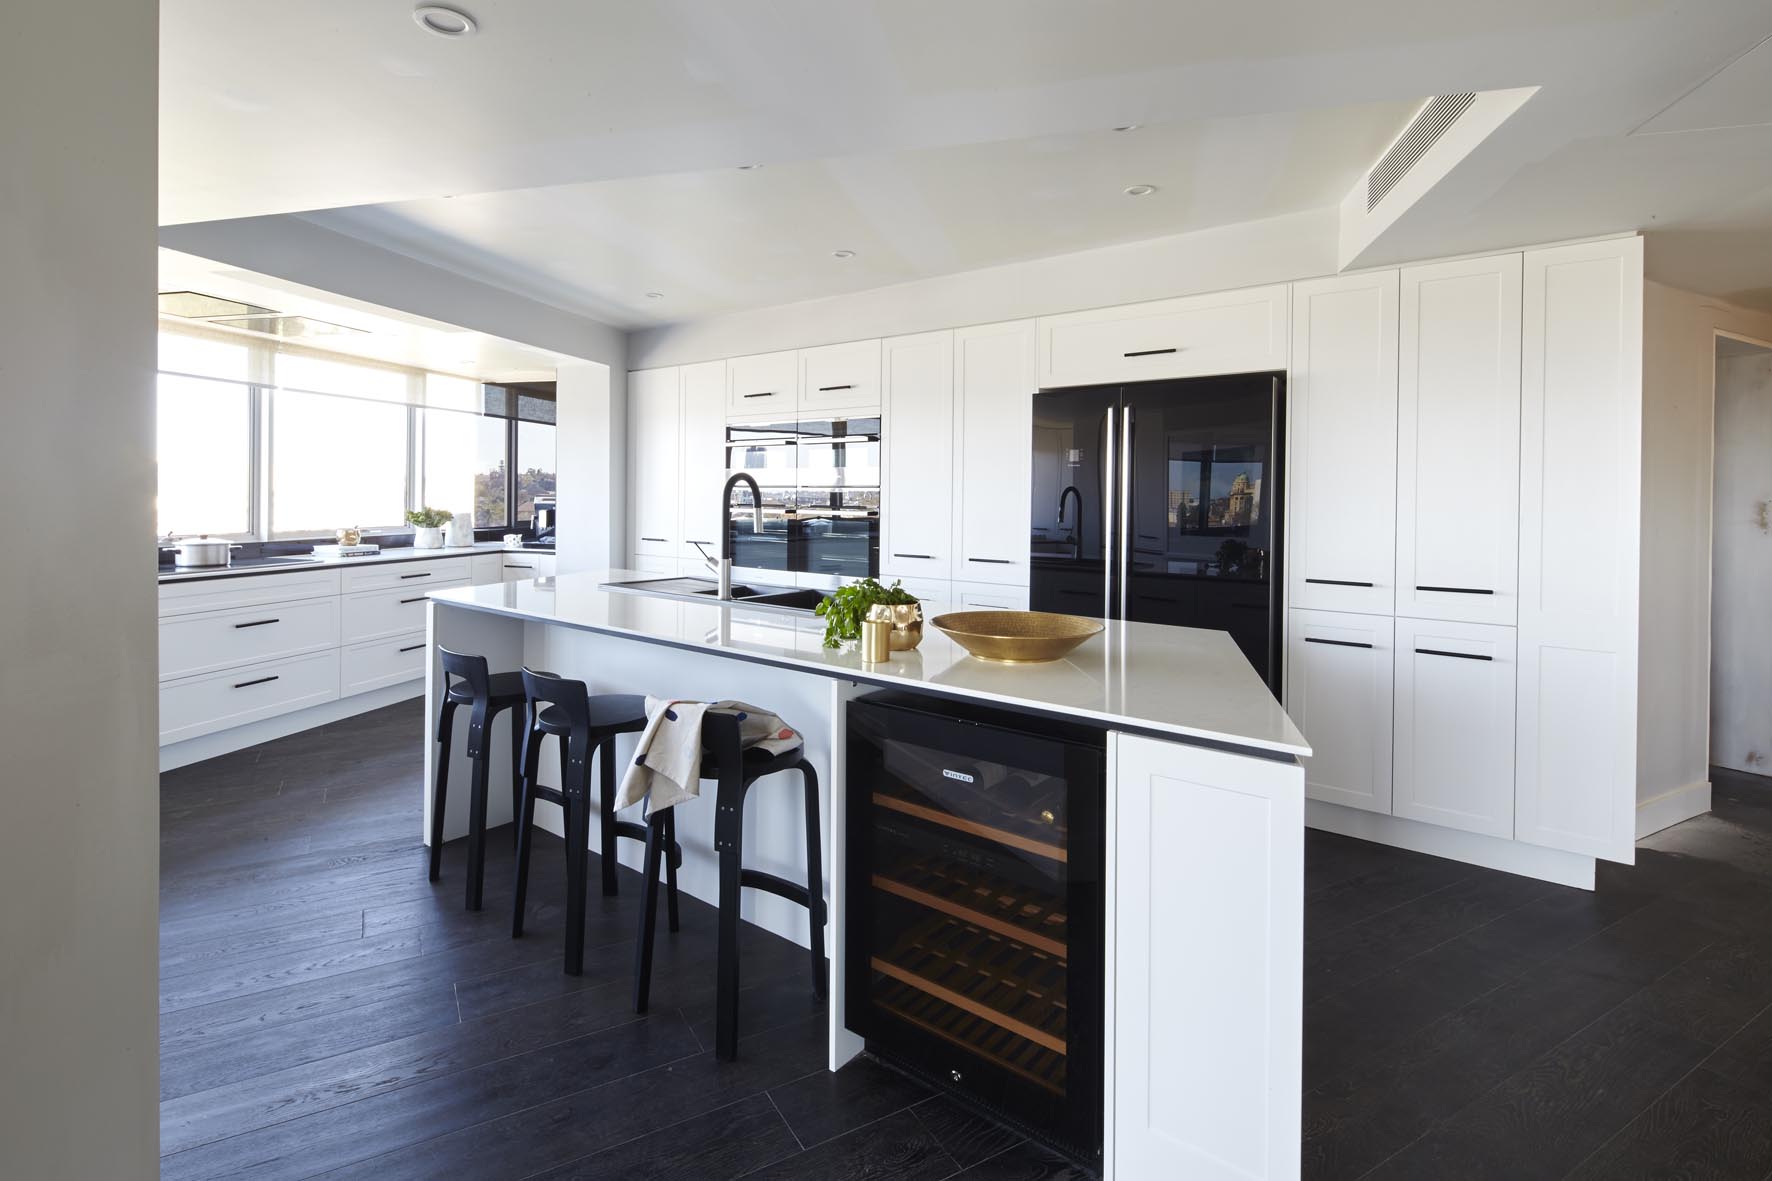 The Block kitchens - The Kitchen and Bathroom Blog